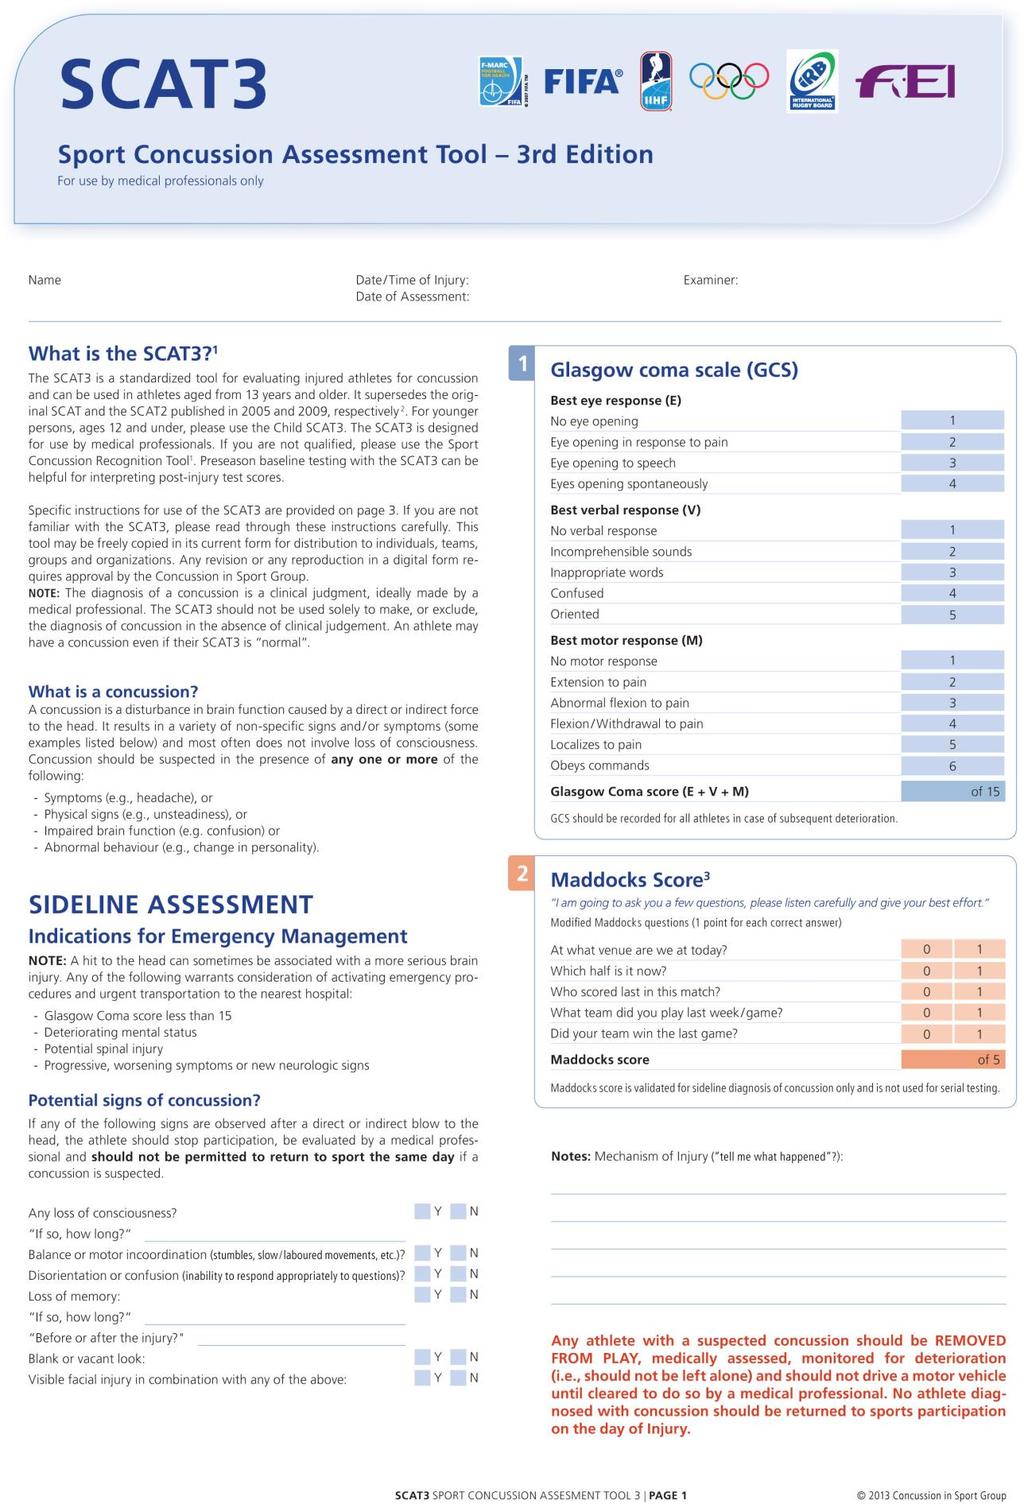 ANNEXURE A SPORT CONCUSSION ASSESSMENT TOOL (SCAT3)